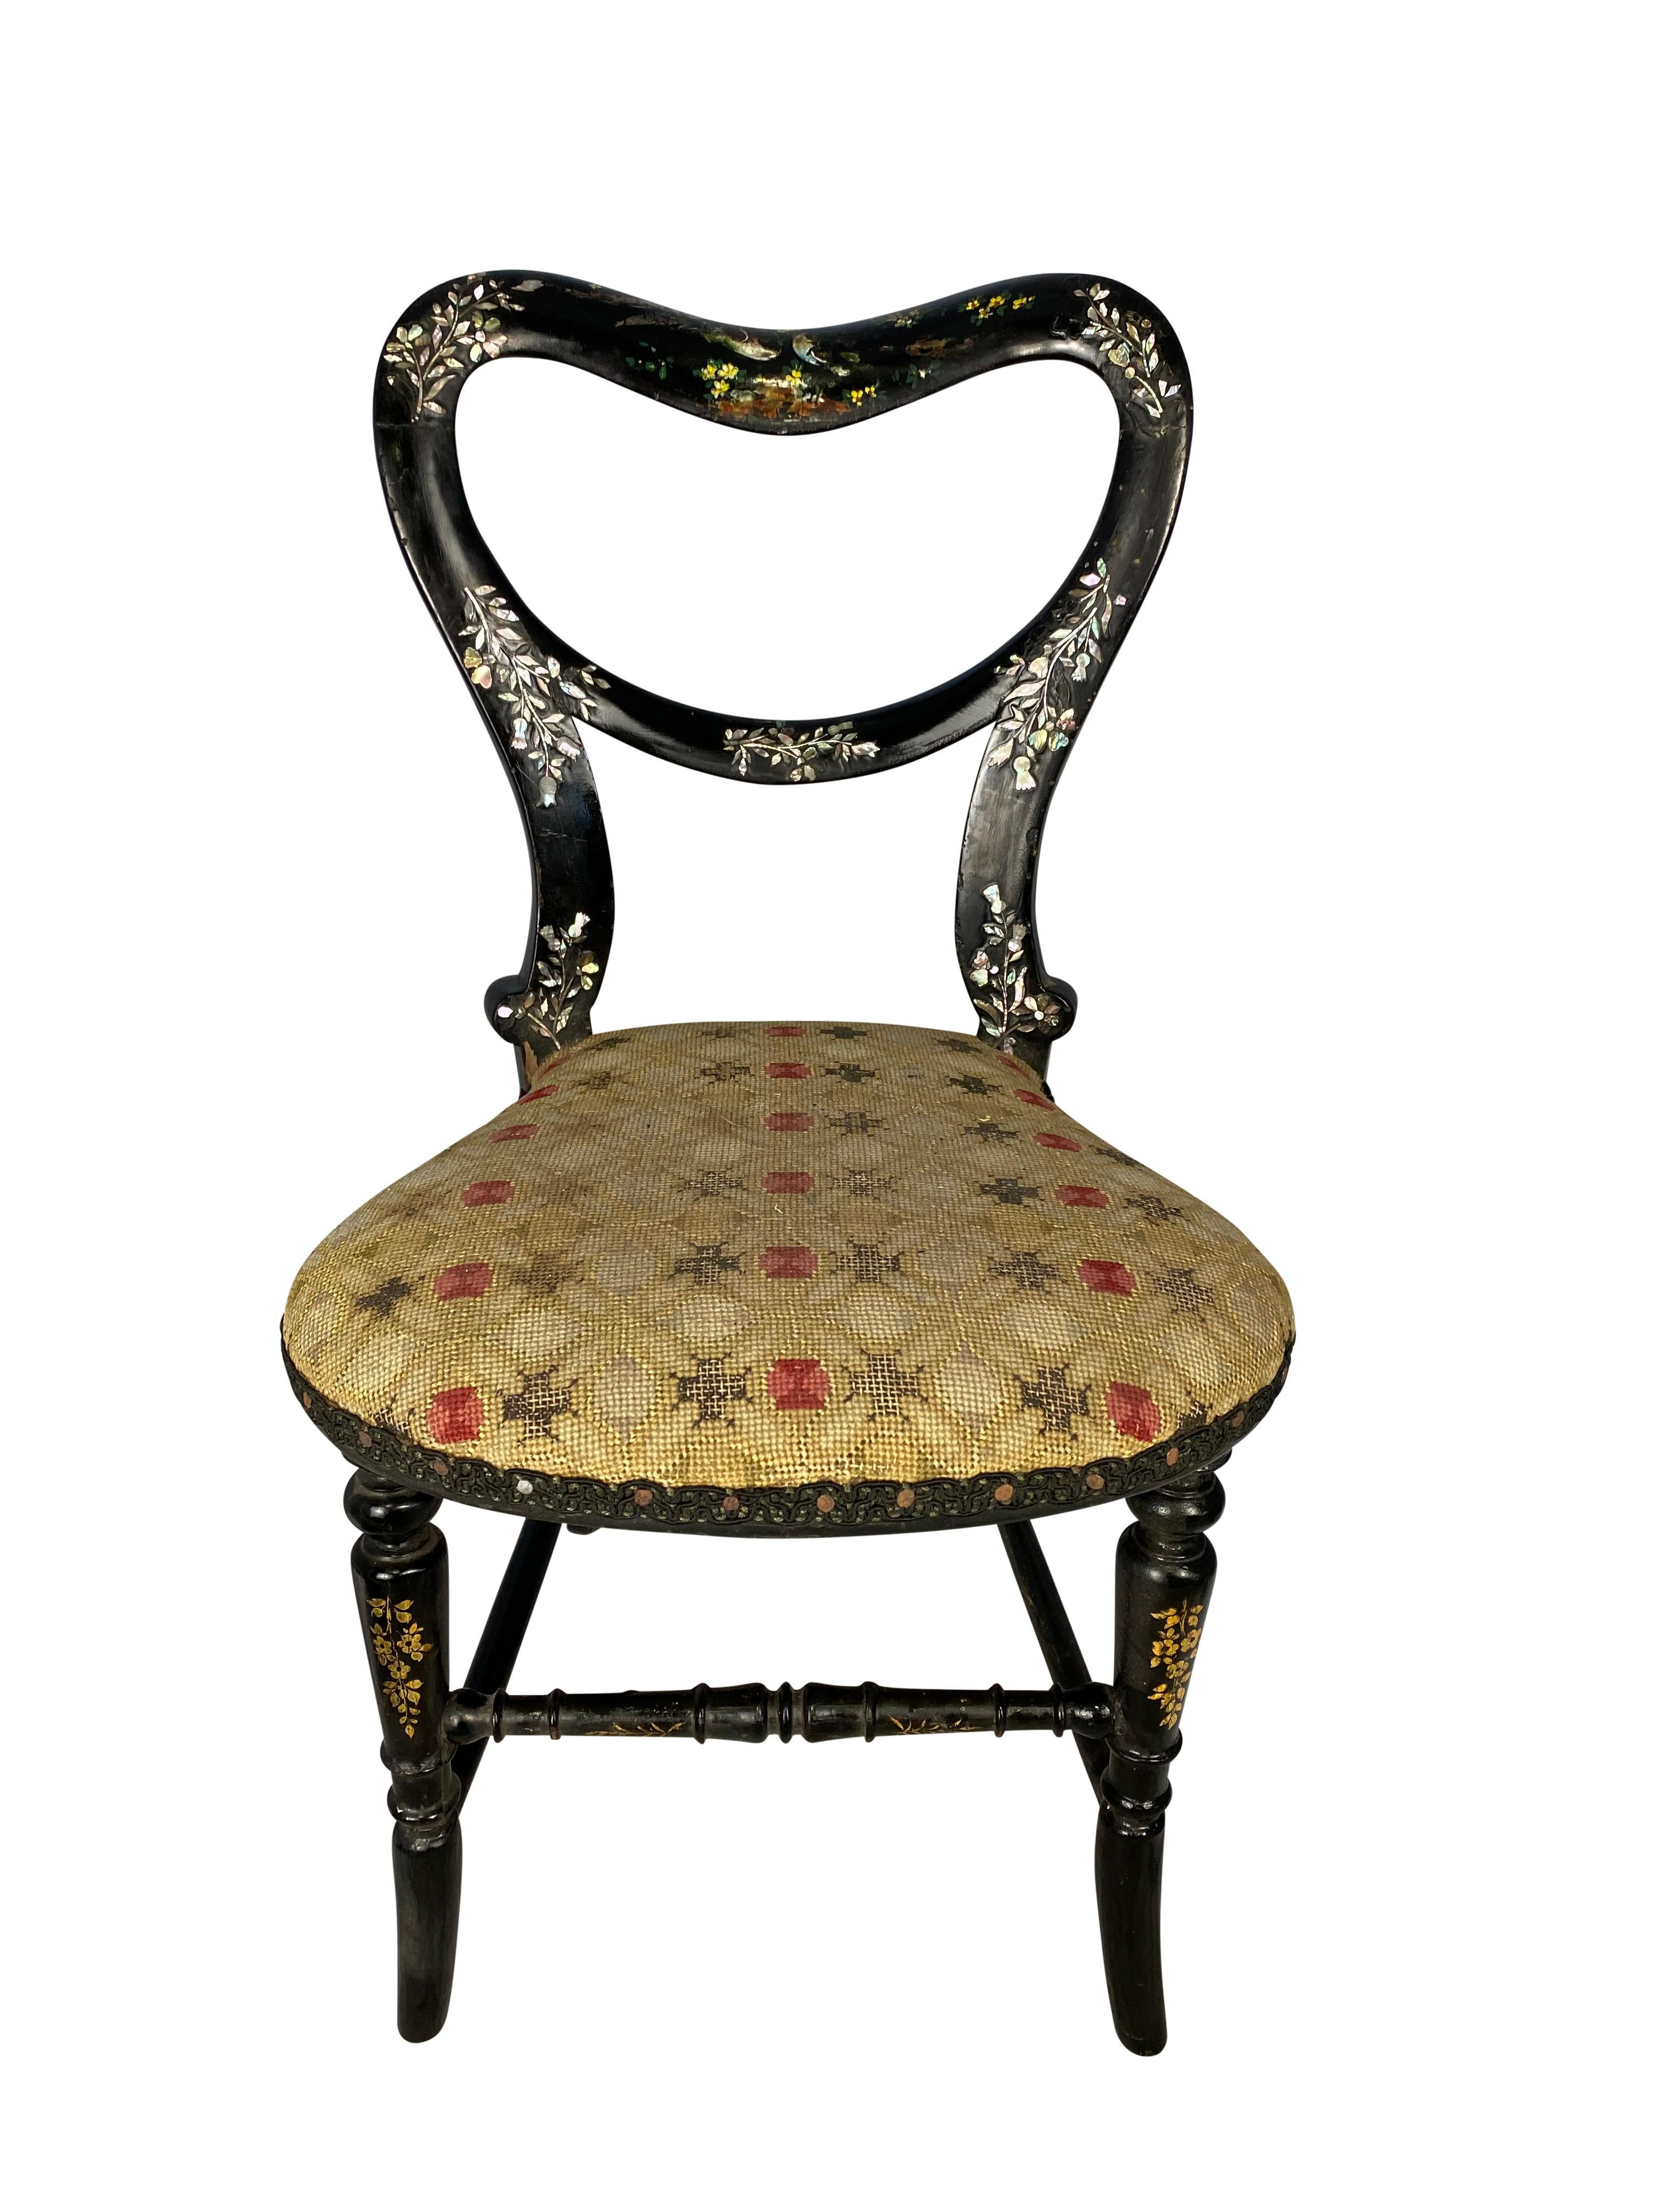 A very fine 19th century ebonized wooden miniature chair. The mother of pearl inlay and hand painted decoration of painted birds with floral surroundings all-over the frame and is accompanied by stretcher base. The inlay projects a variety of unique